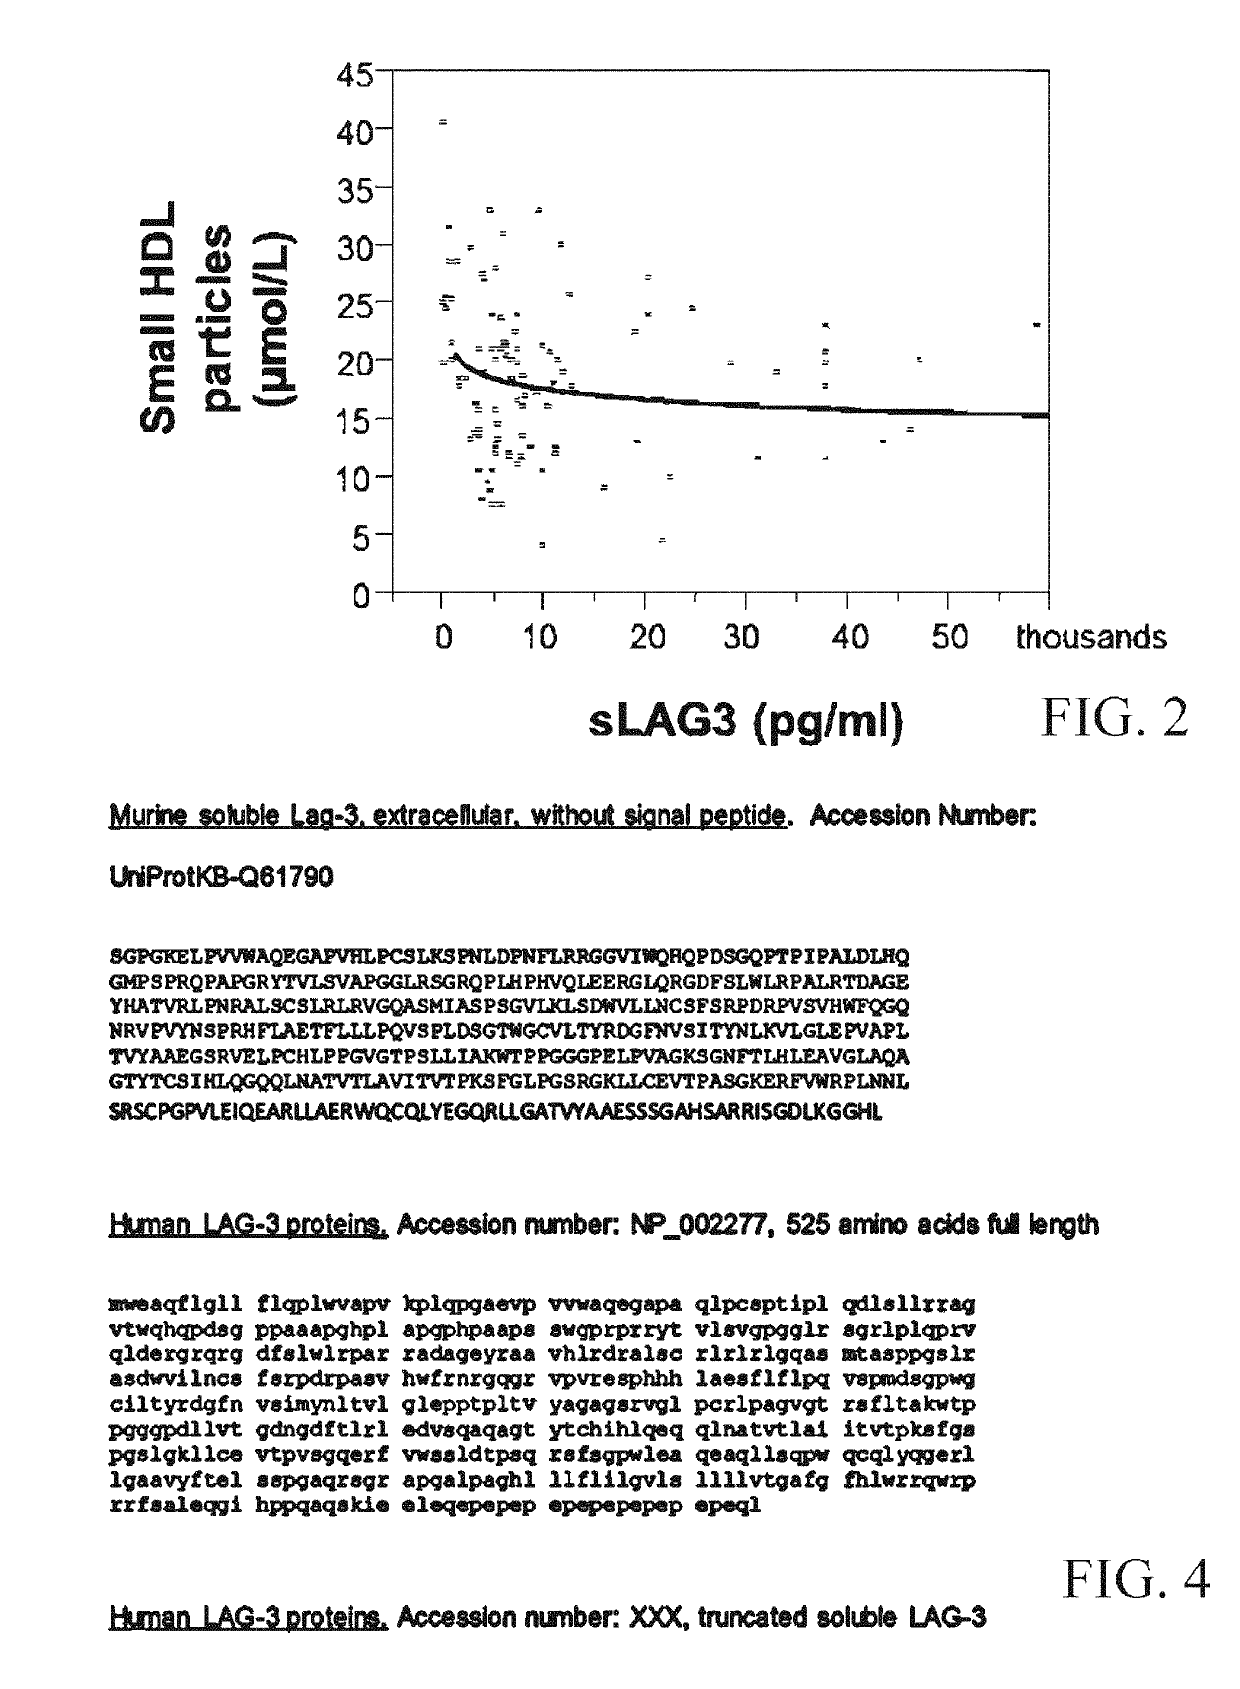 Use of recombinant lymphocyte activation gene-3 as a companion therapeutic for patients at risk for cardiovascular disease and other chronic inflammatory diseases